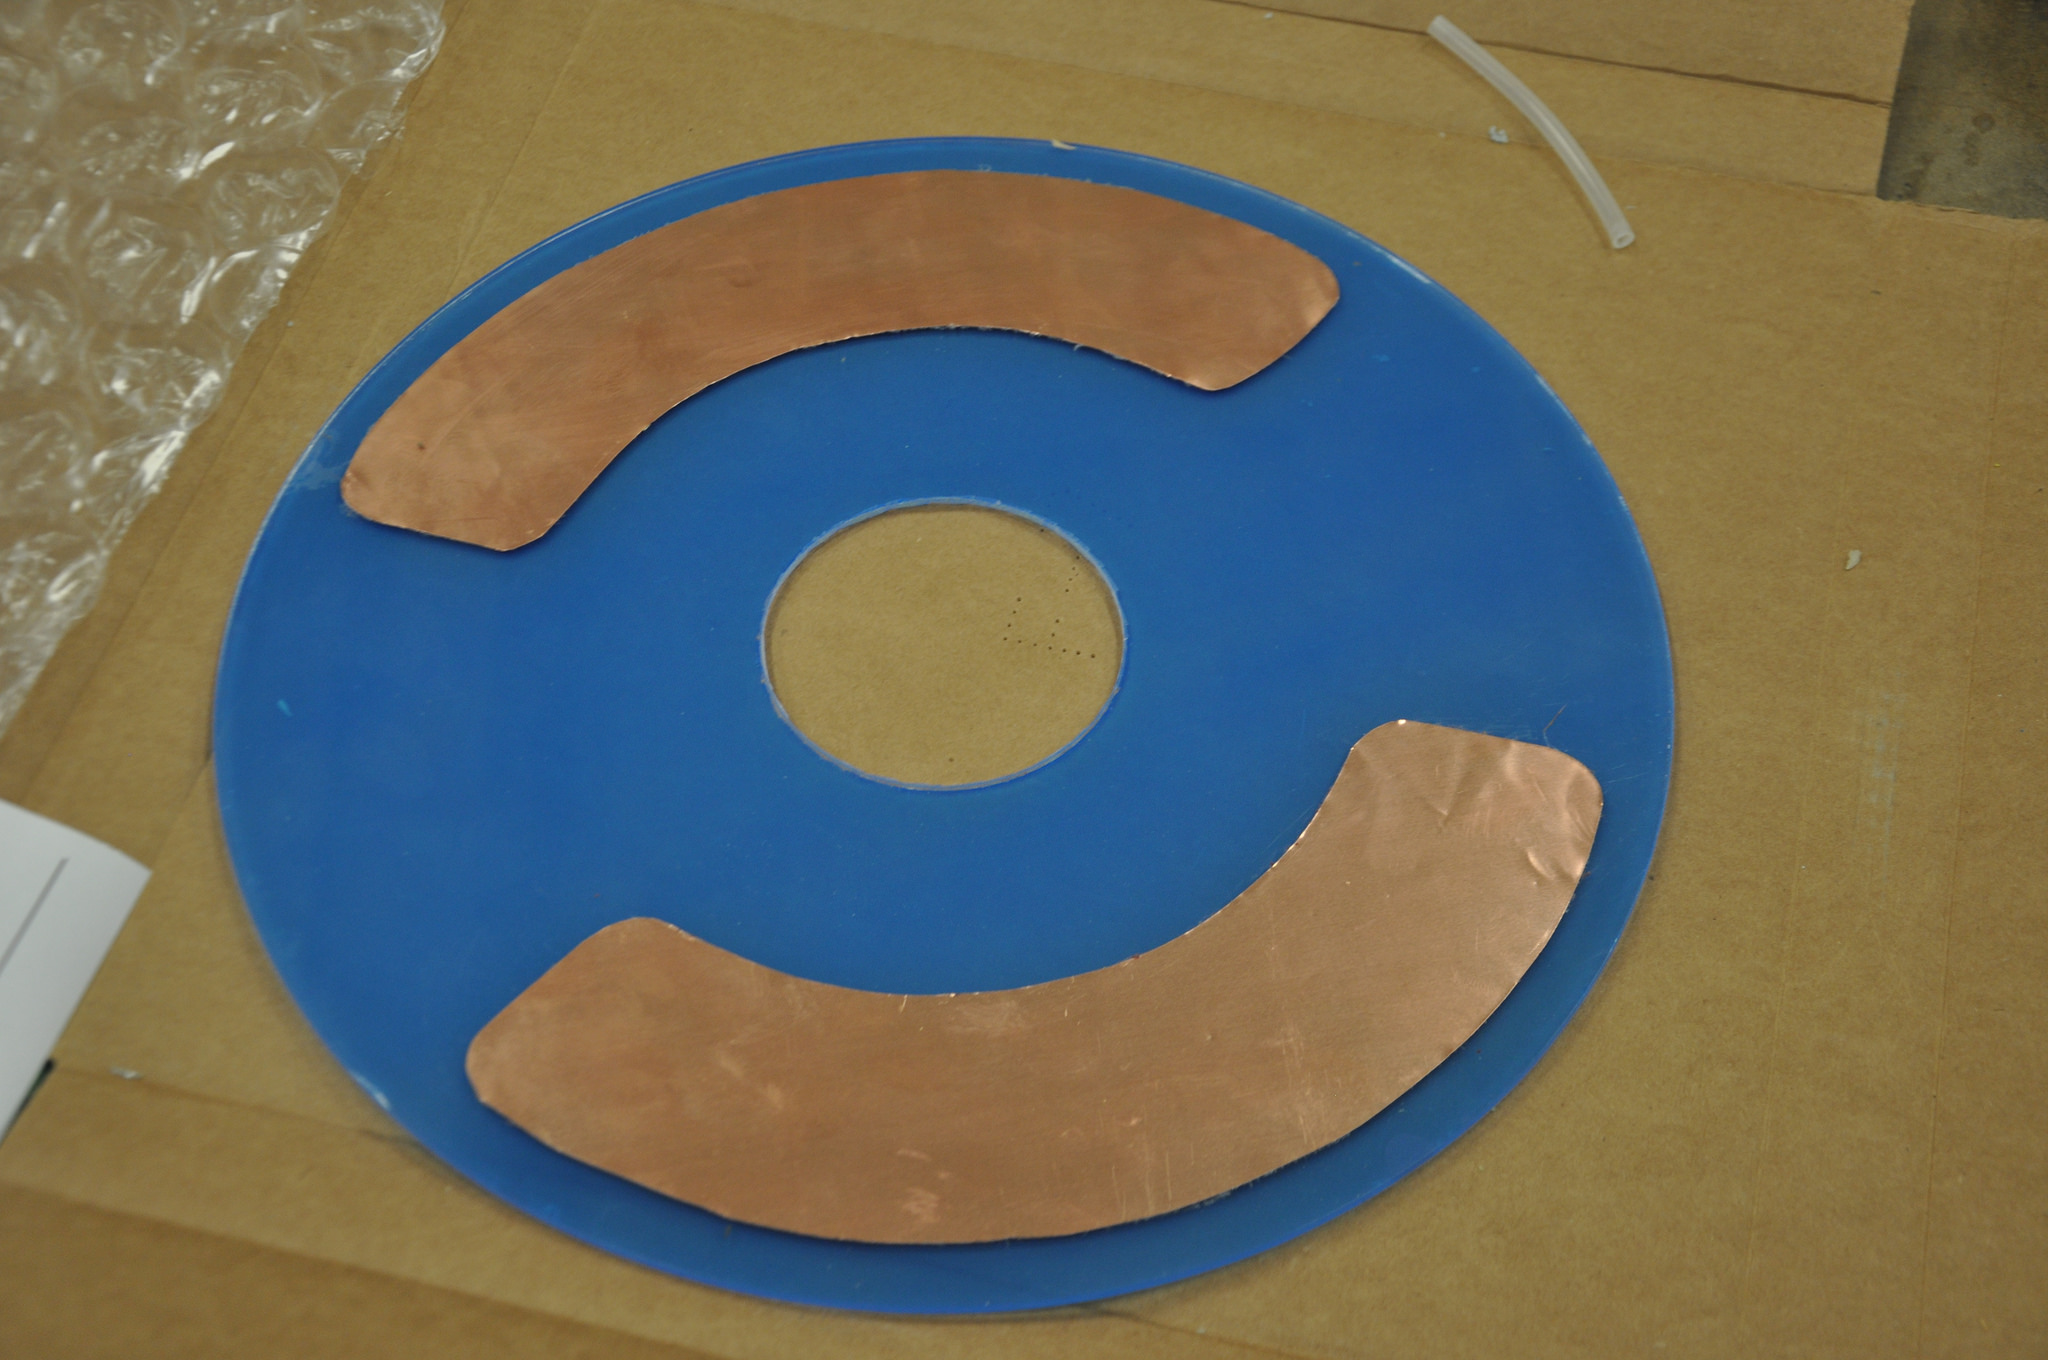 Plastic disk with glued on copper shim